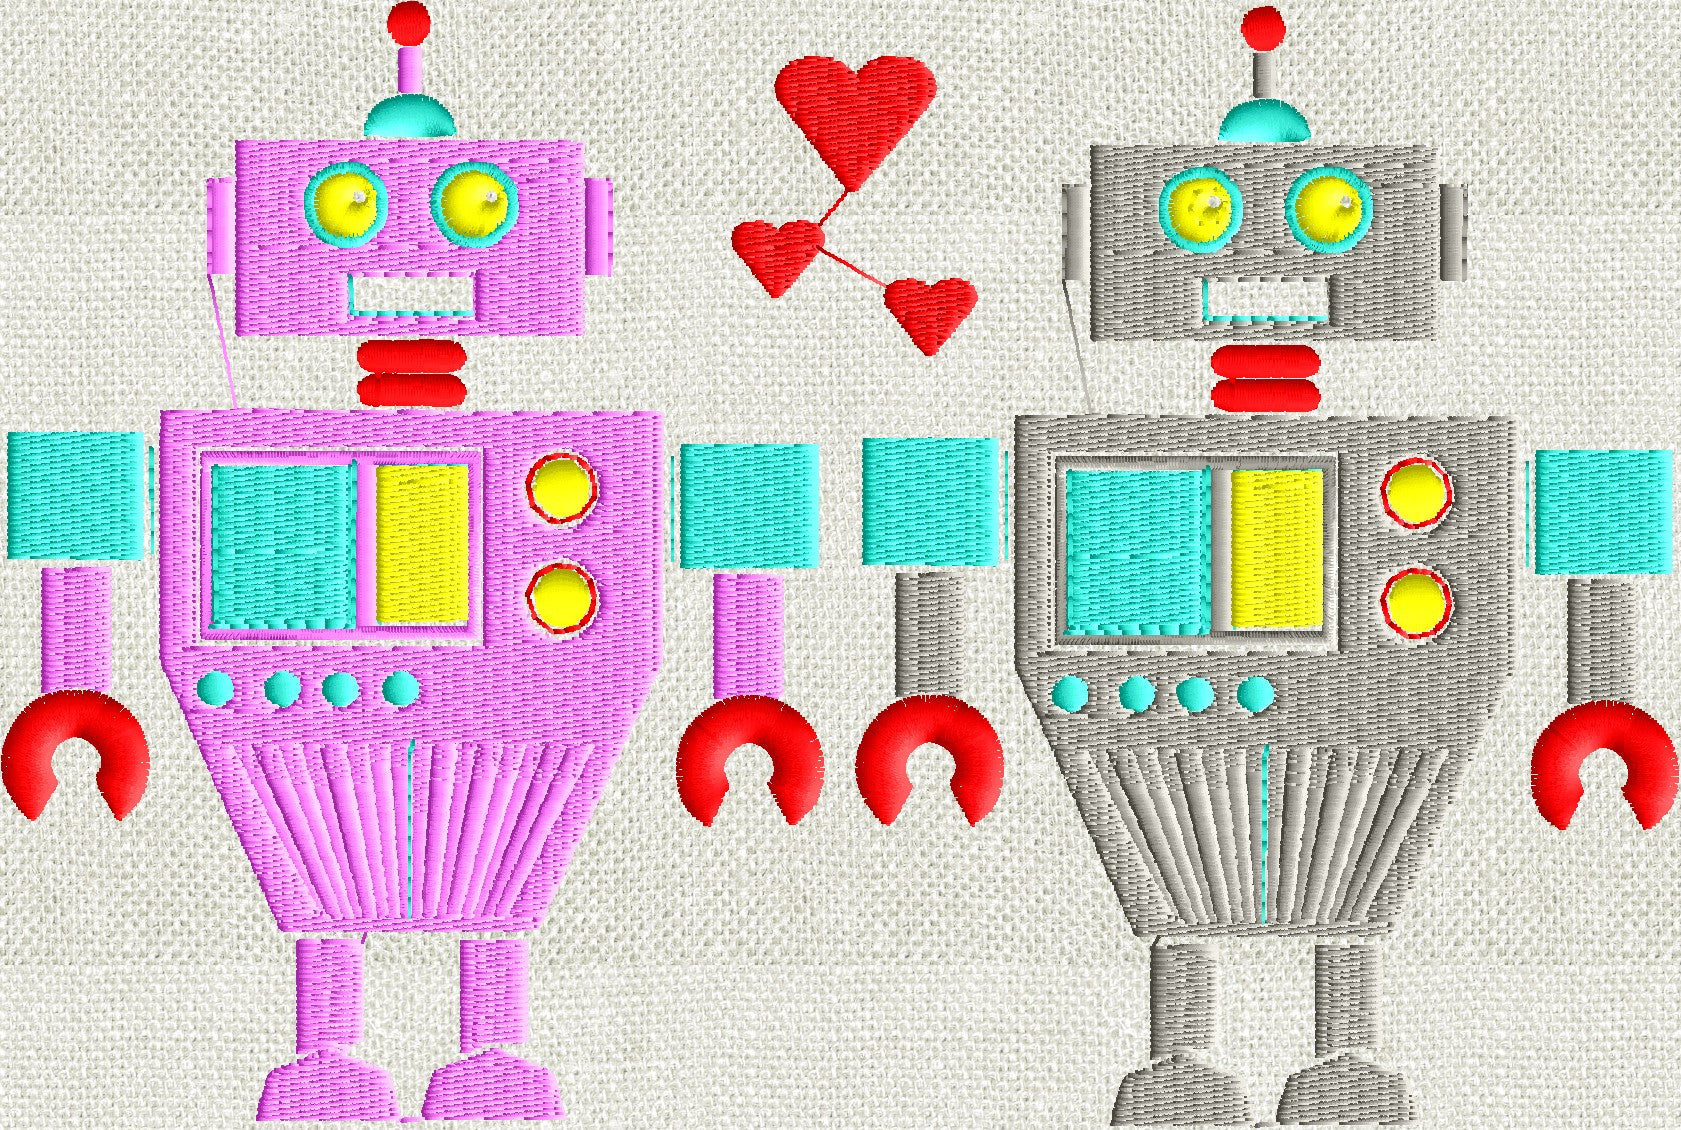 Robot Love - Valentines Day themed - EMBROIDERY DESIGN FILE- Instant download - Exp Jef Vp3 Pes Dst formats - 5x7 hoops and larger